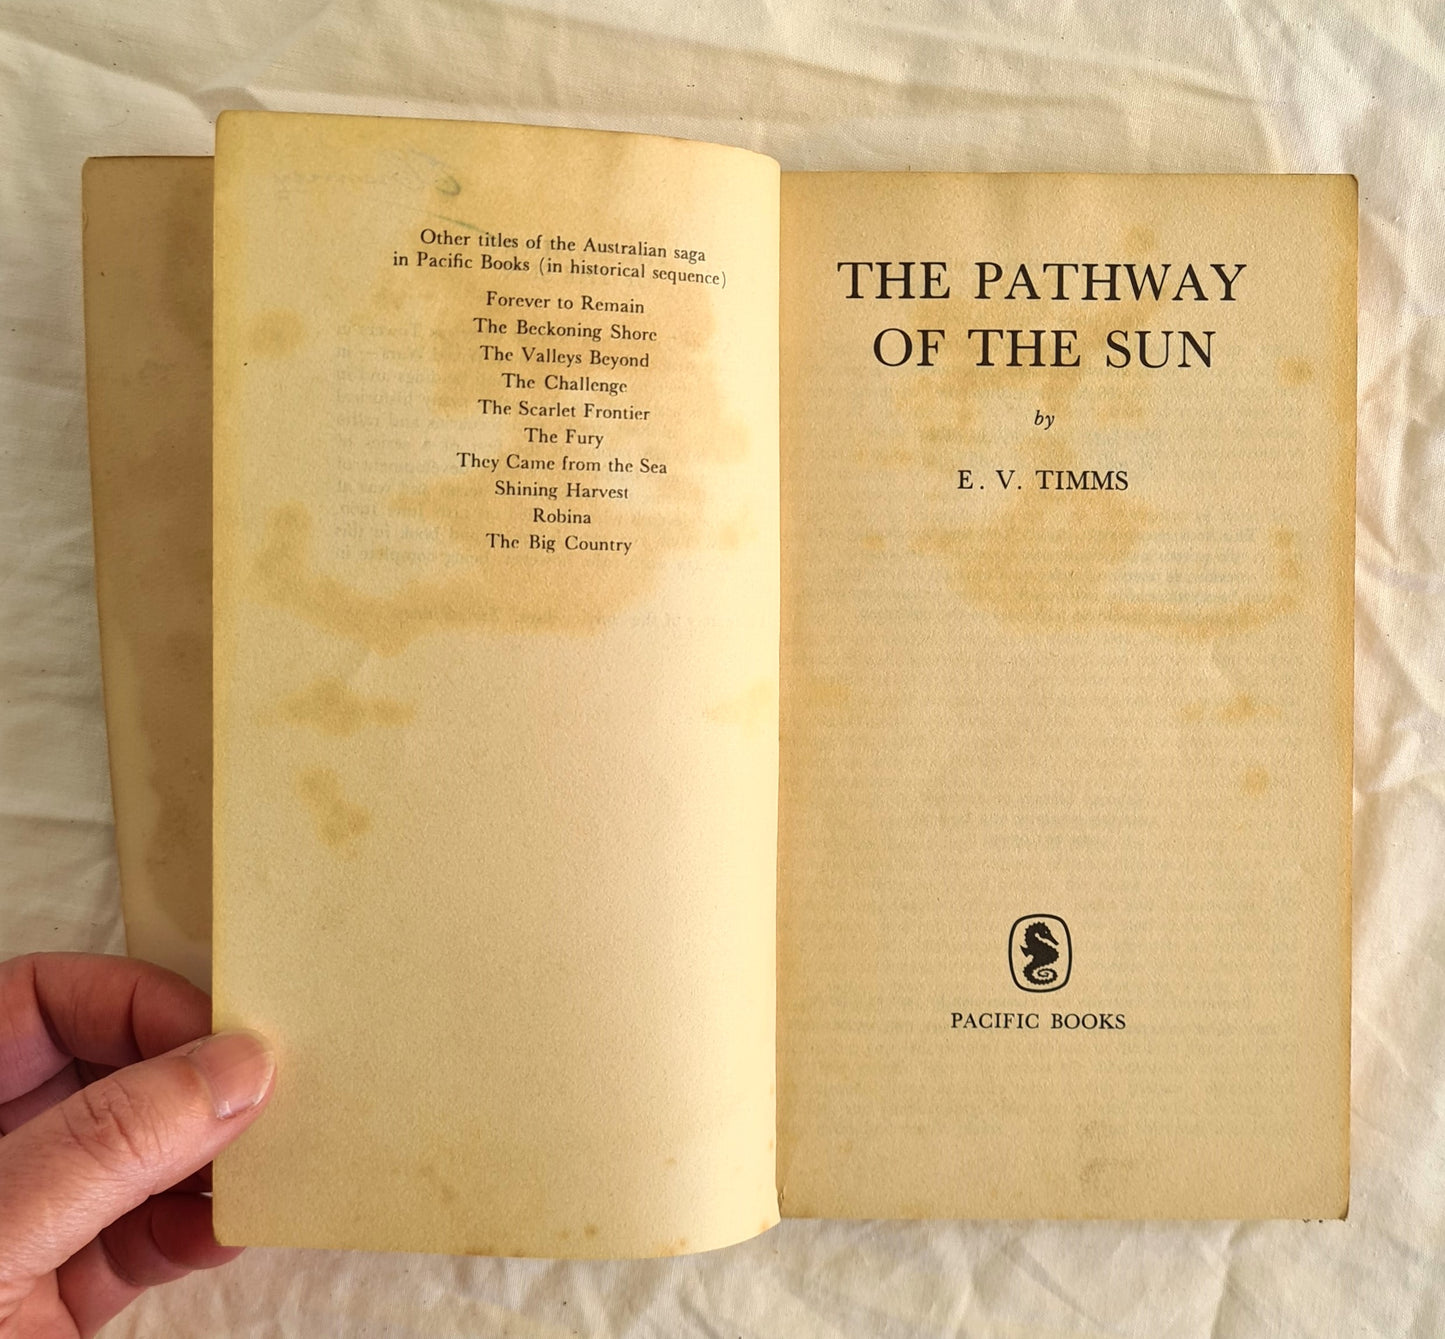 The Pathway of the Sun by E. V. Timms (PB)